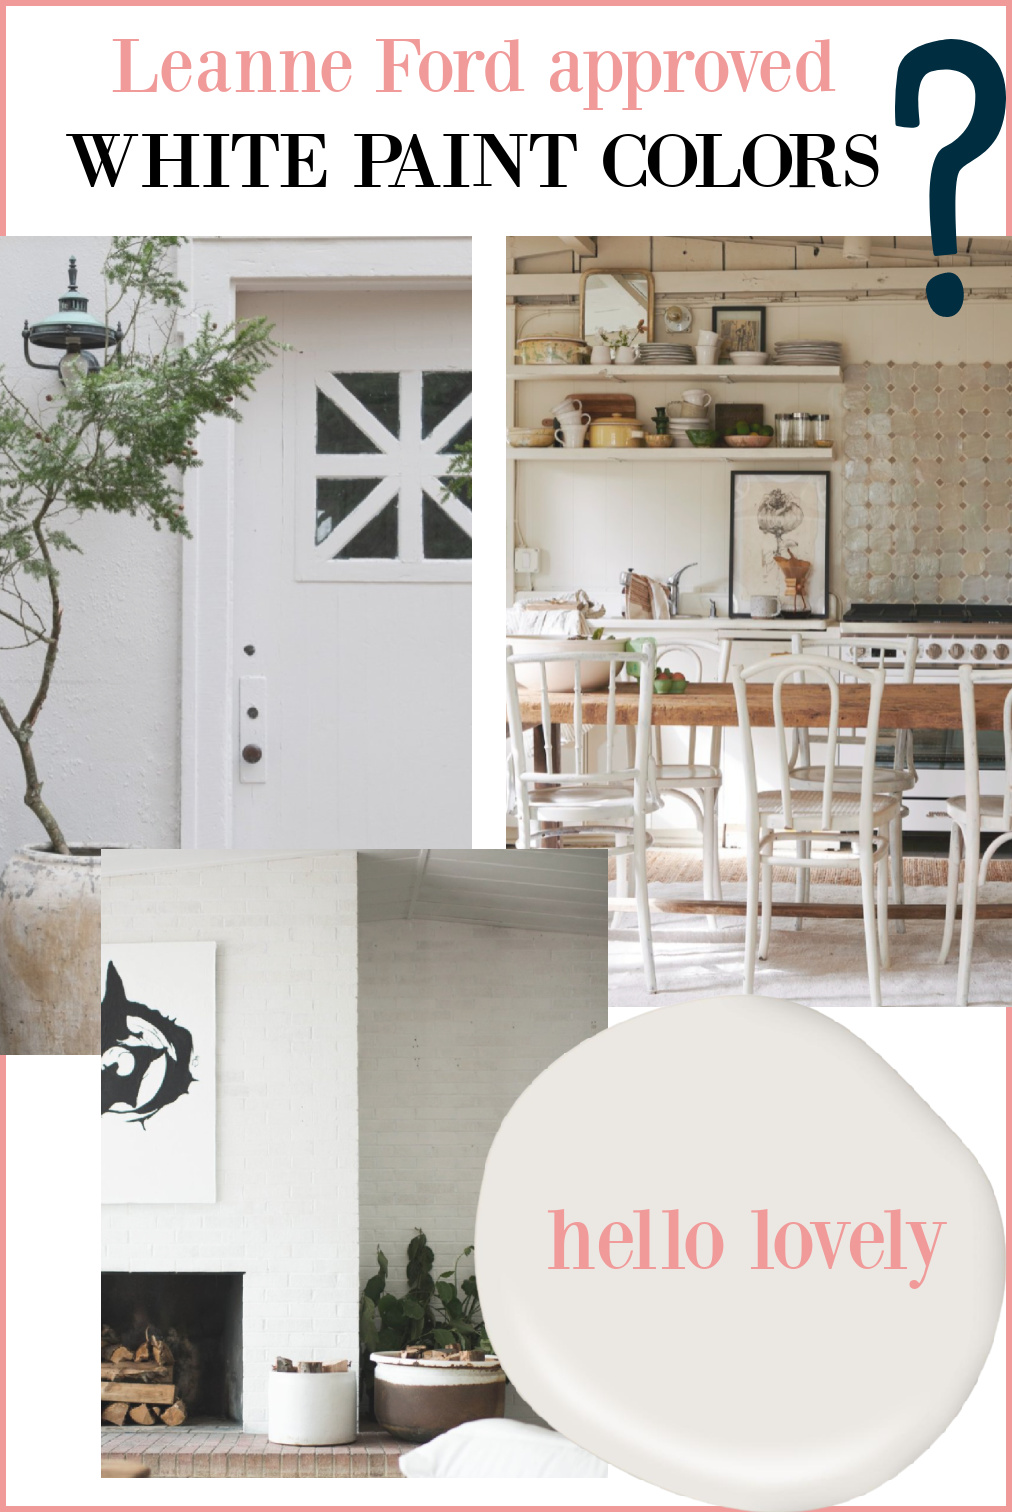 Leanne Ford approved white paint colors - get more of the scoop at Hello Lovely Studio.